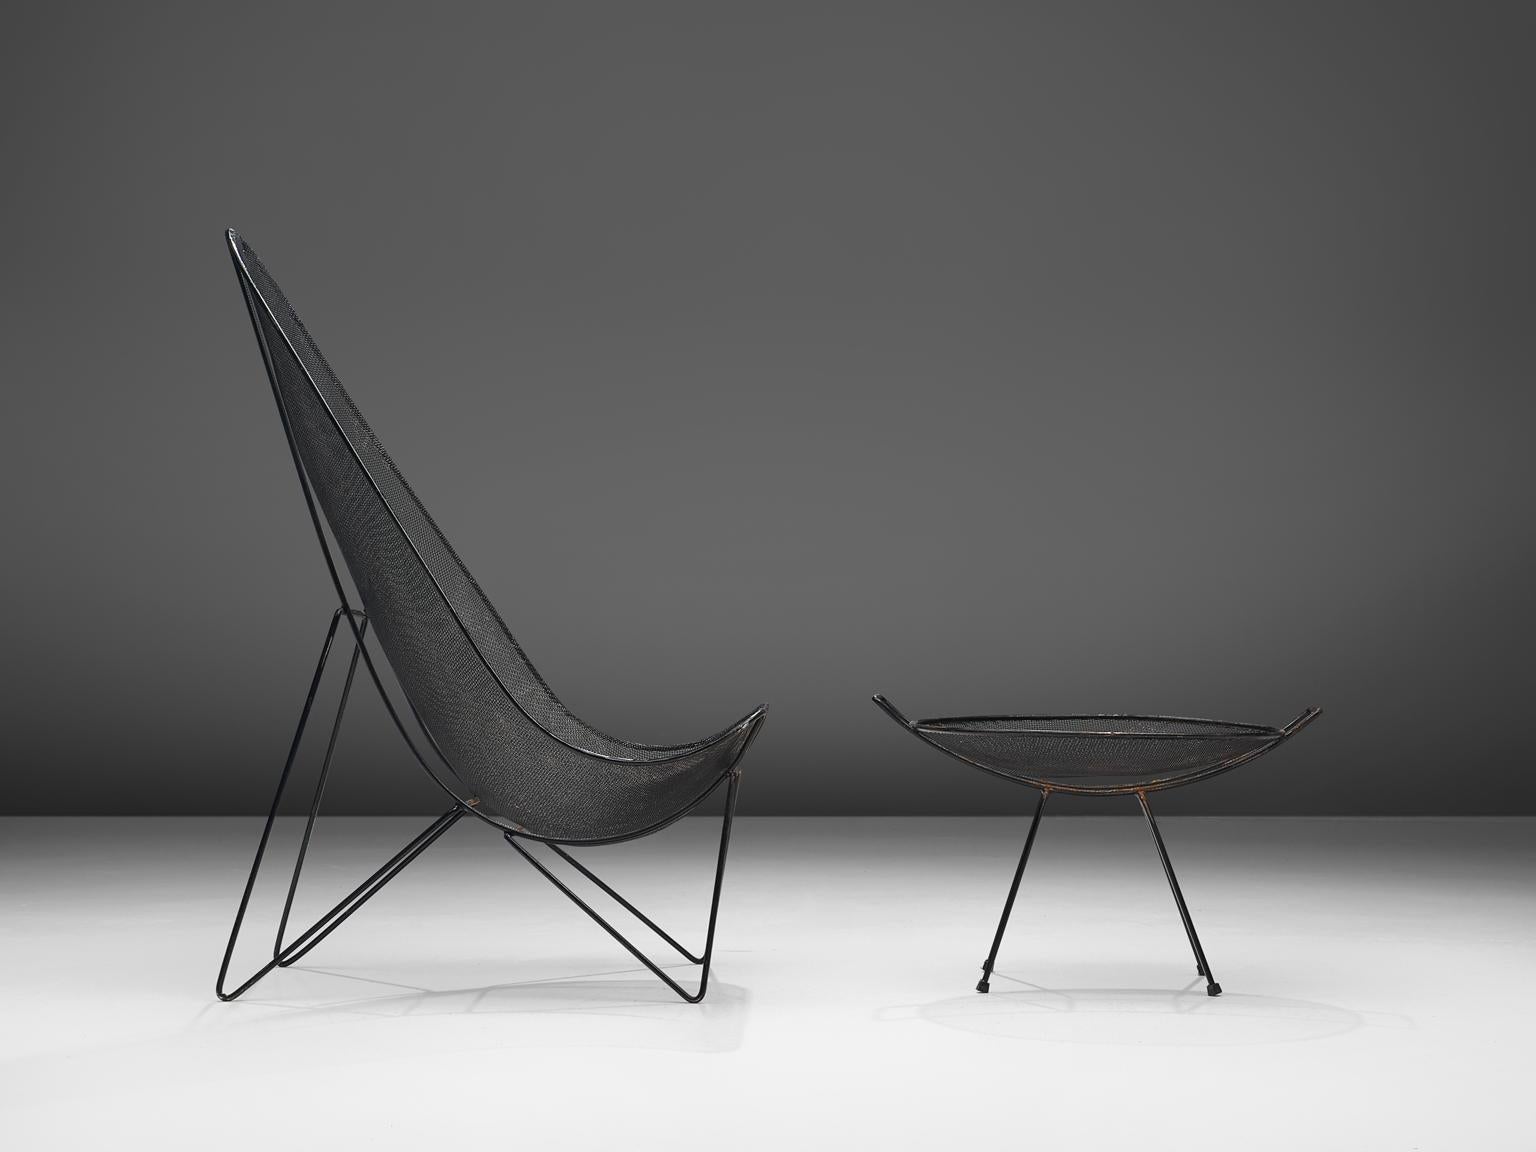 Sol Bloom, 'Scoop' patio chair and catch-all in black wrought iron with table, United States, 1950s. 

This high back patio or garden chair designed by Sol Bloom, which can be used as a lounge chair as well, is executed in iron and woven steel.